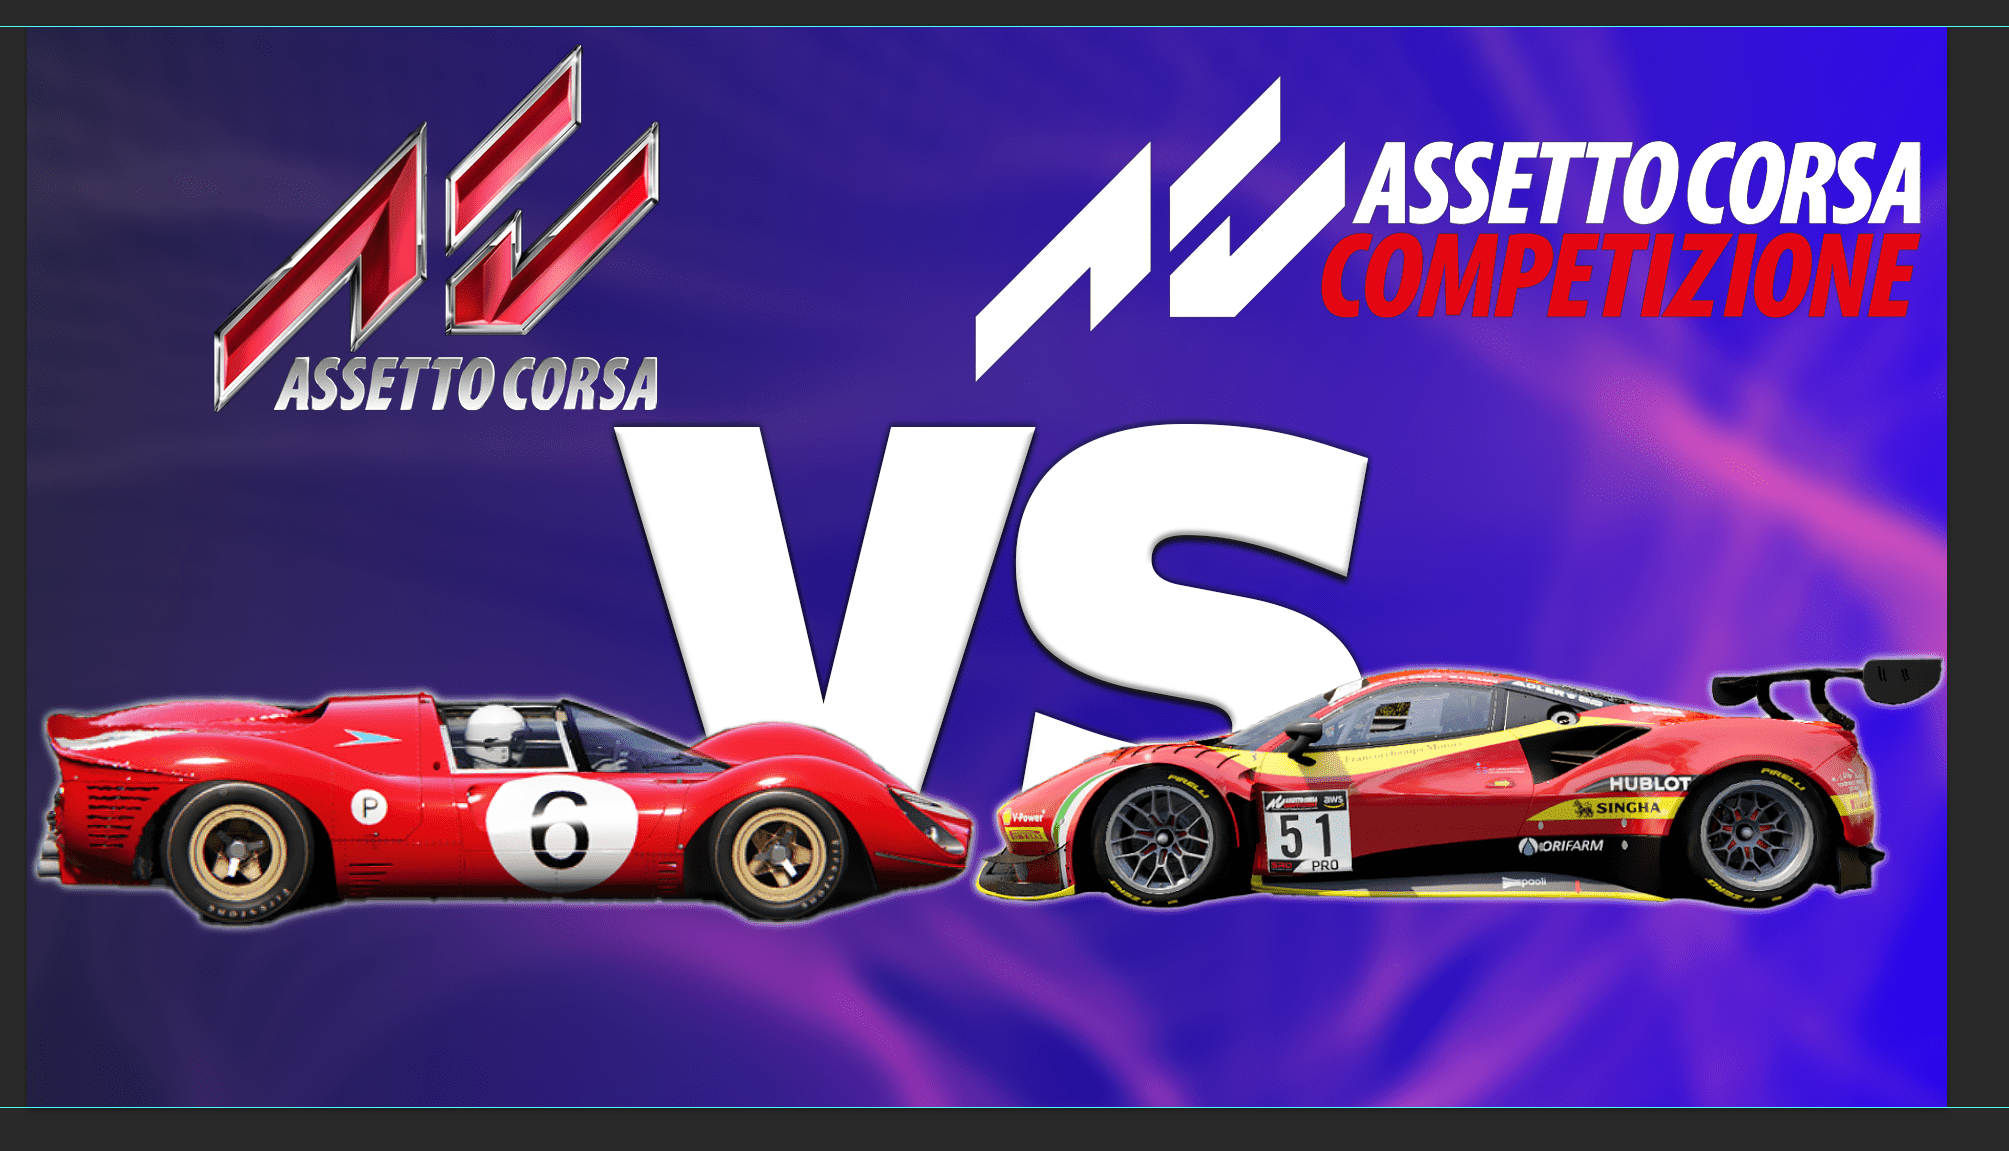 The difference between Assetto Corsa and Assetto Corsa Competizione